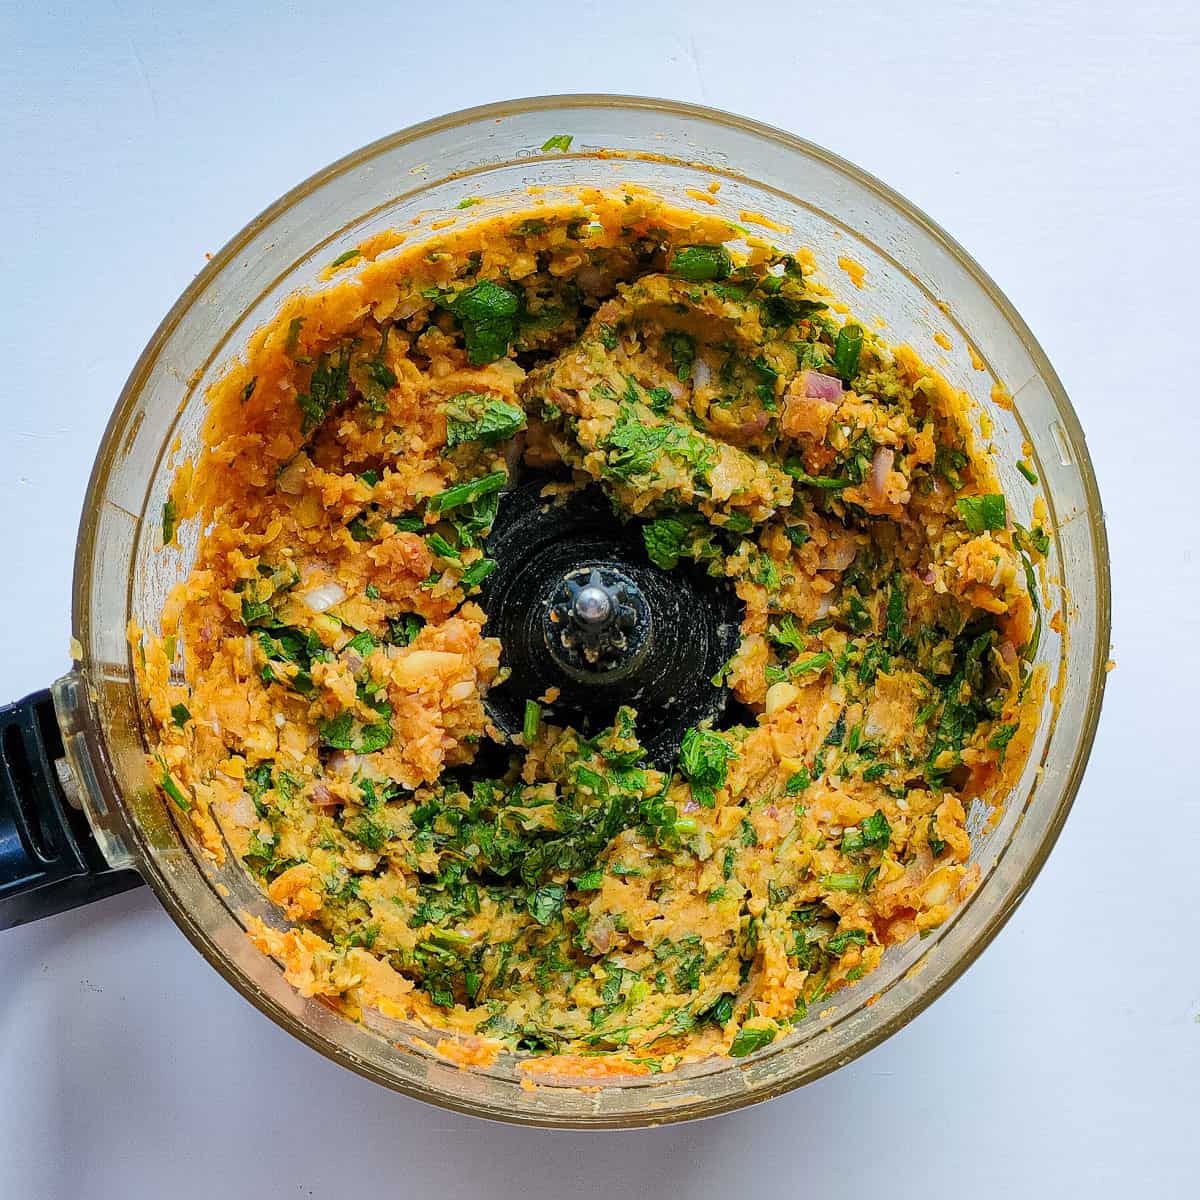 Mashed chickpeas with seasonings in a food processor jar.